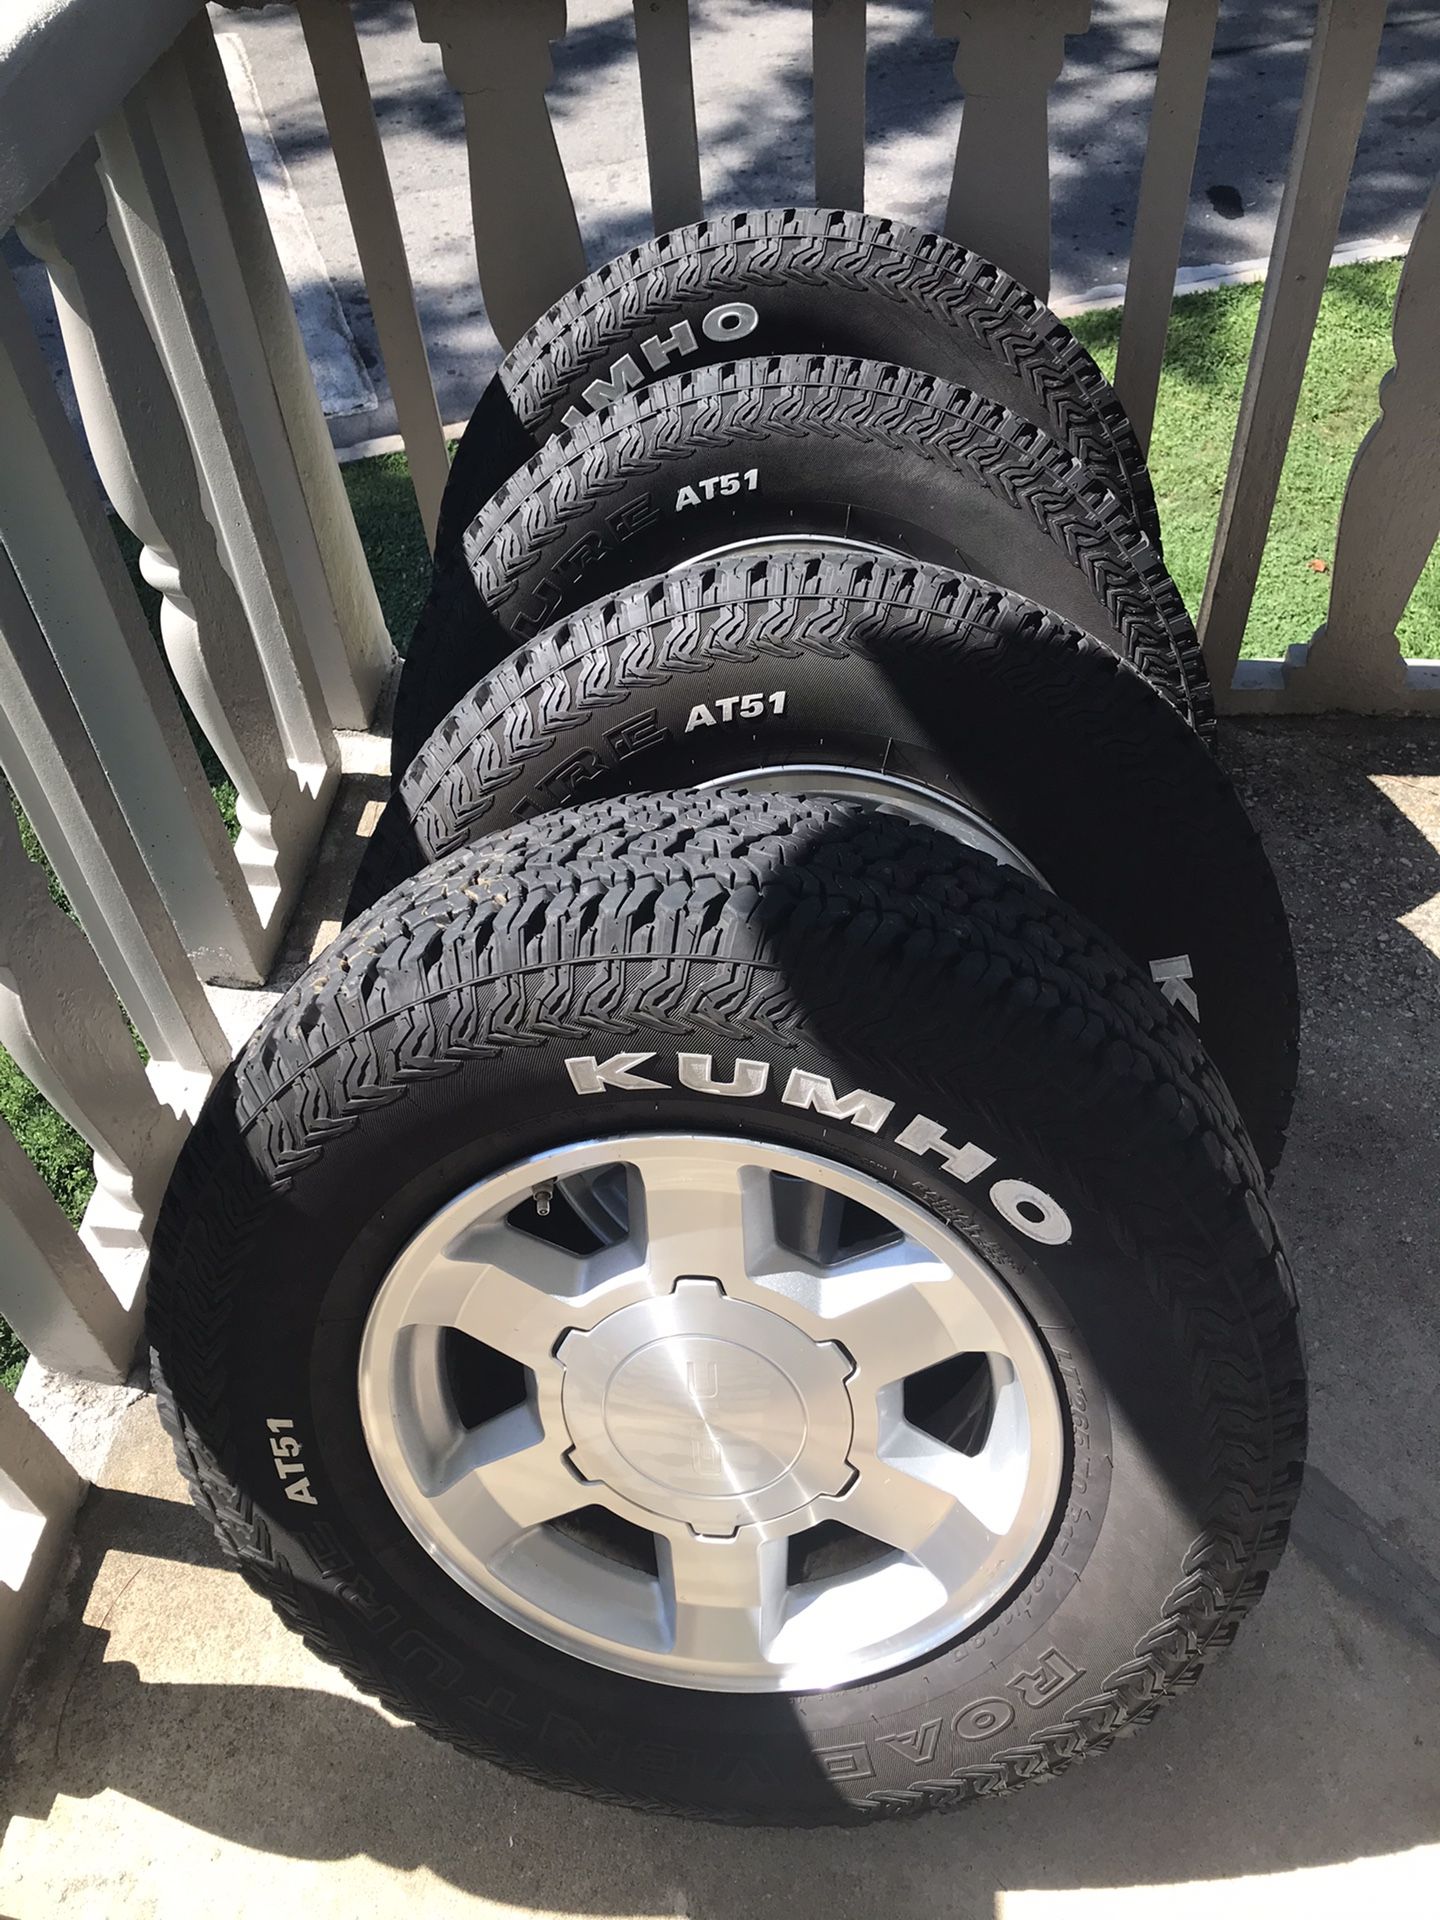 GMC/Chevy rims and tires